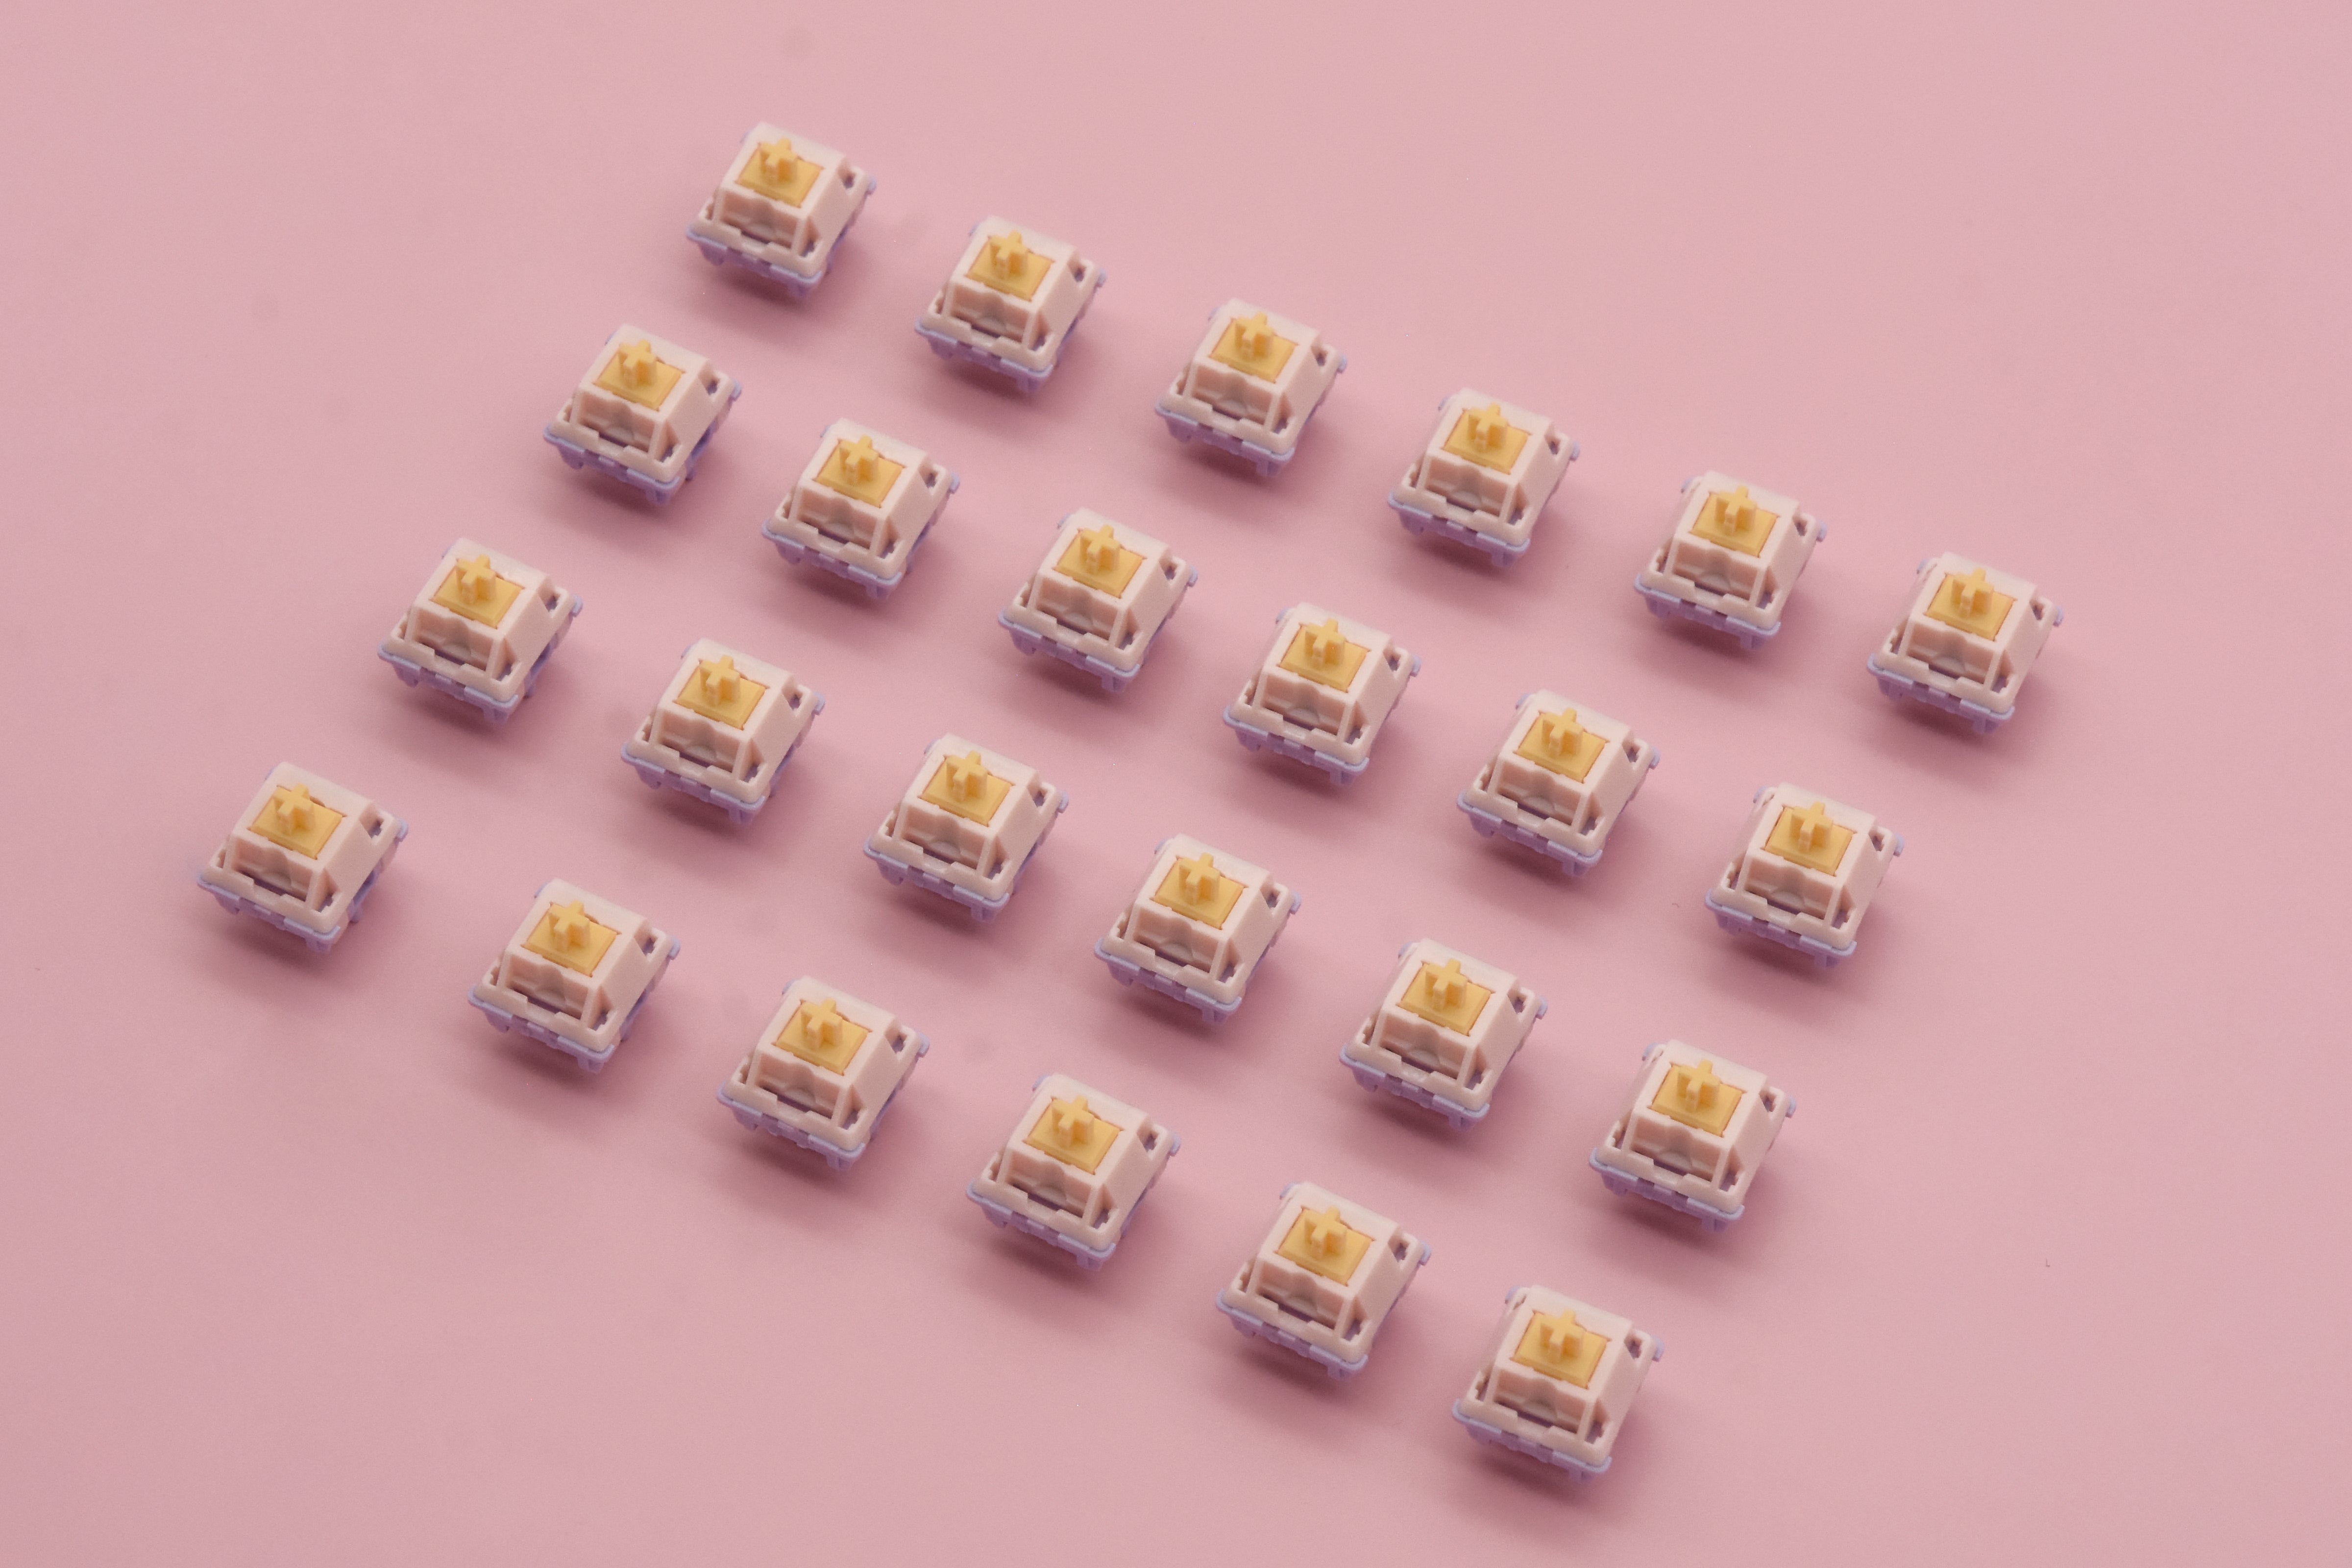 MMD PRINCESS TACTILE V2 SWITCH FACTORY LUBED EDITION (10PCS)